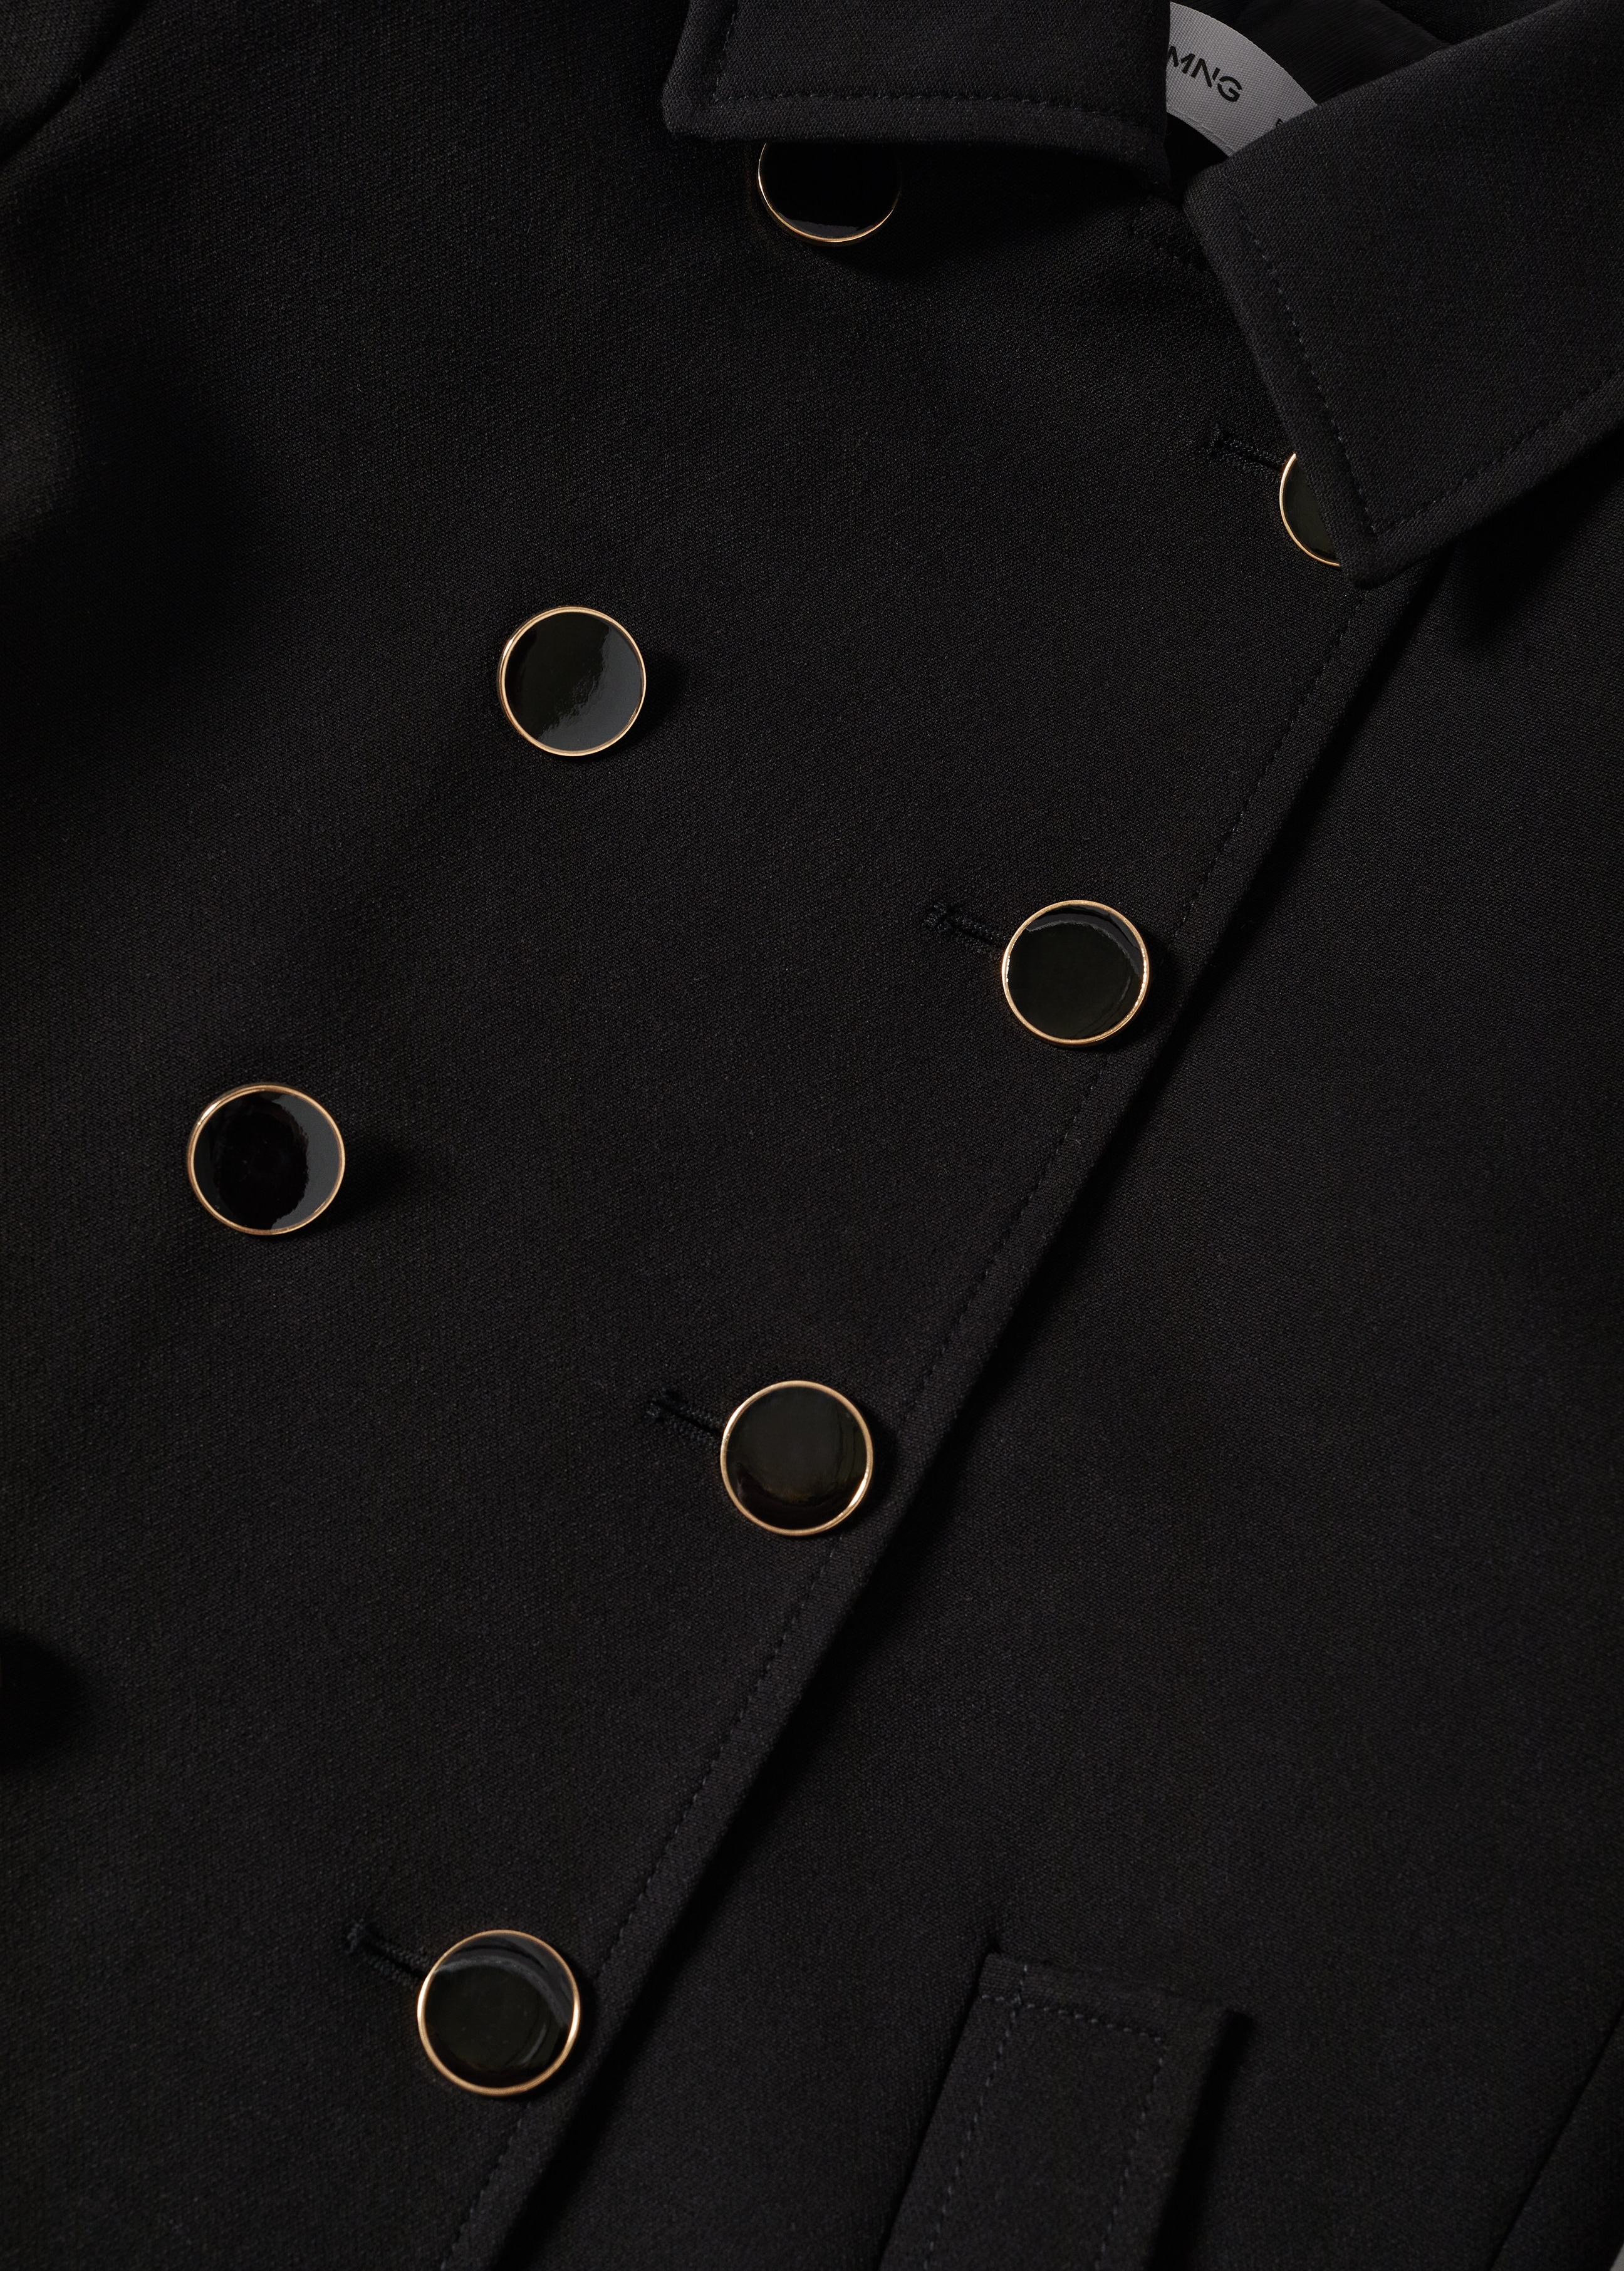 Double-breasted jacket with buttons - Details of the article 8